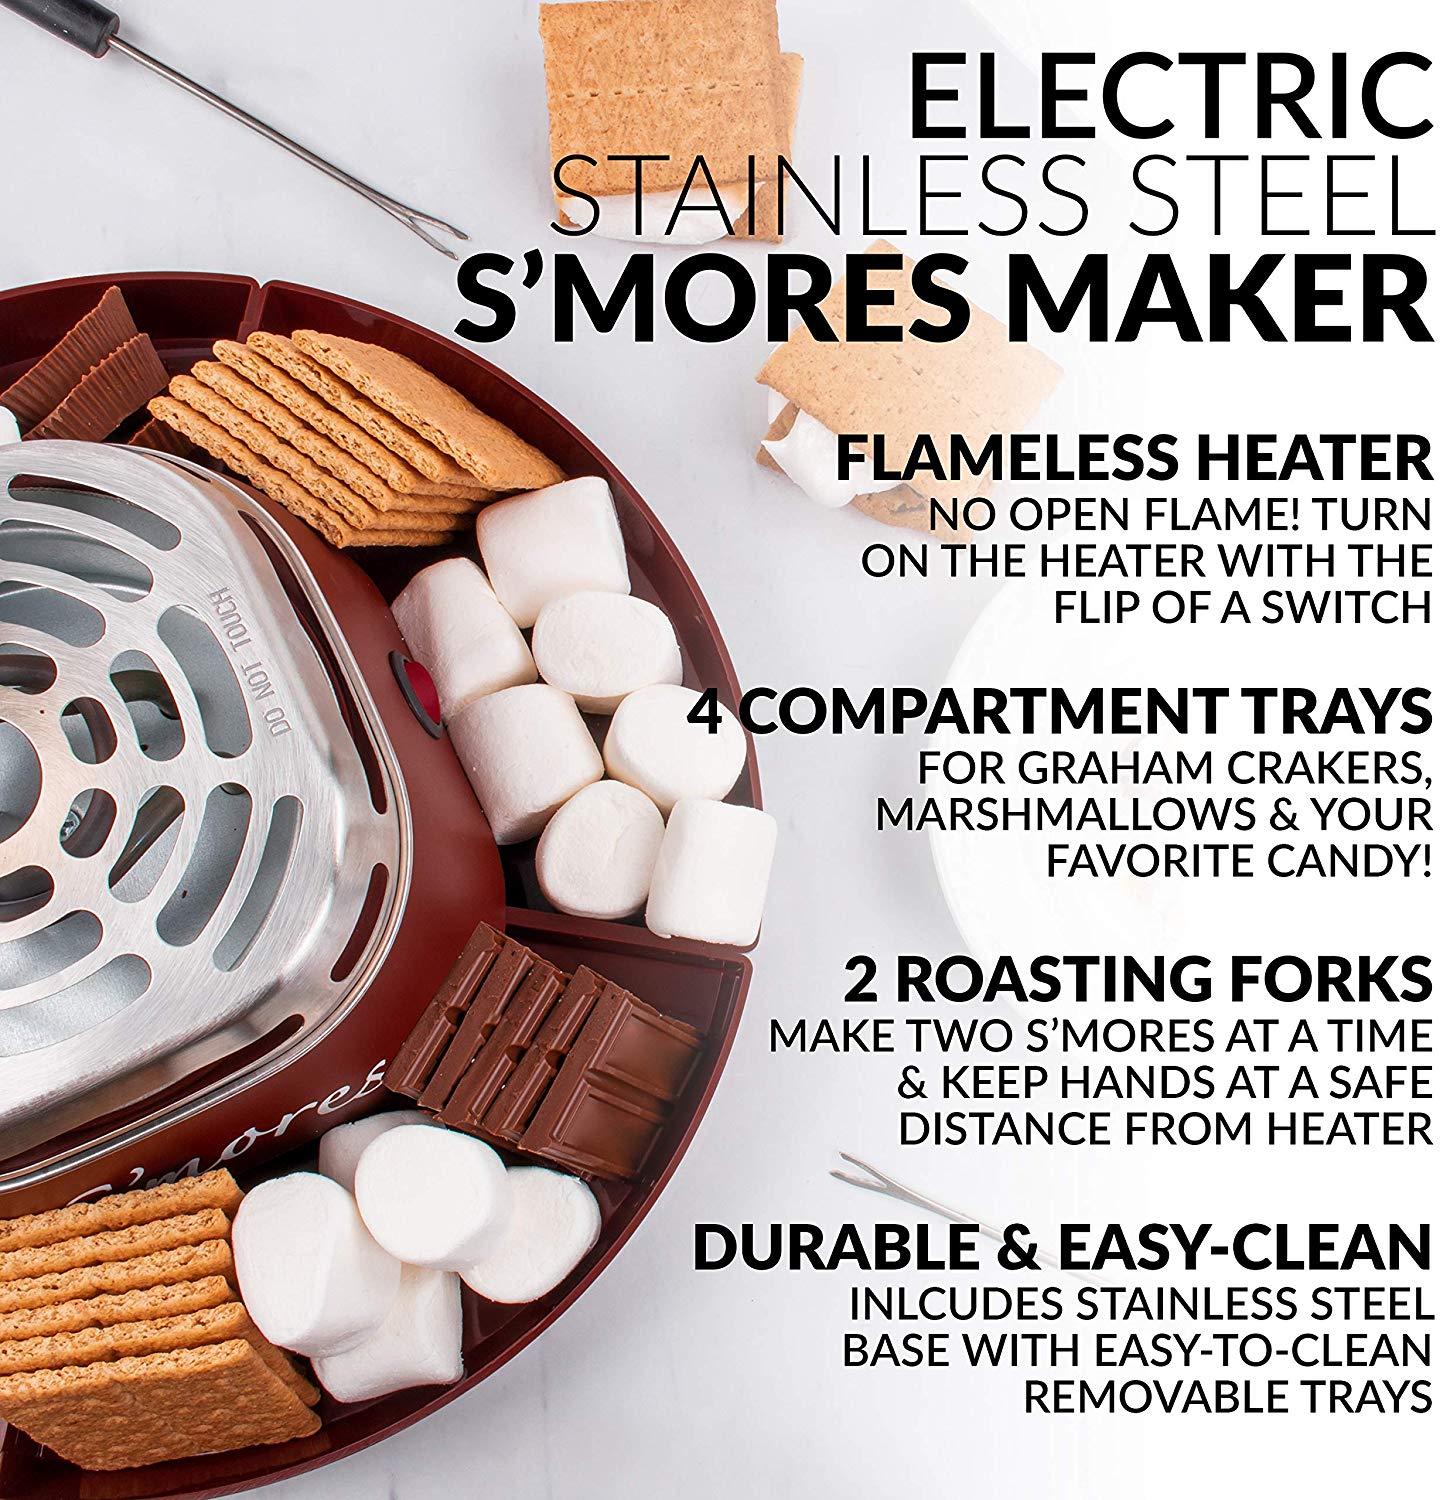 This microwave s'mores maker is my new favorite kitchen gadget